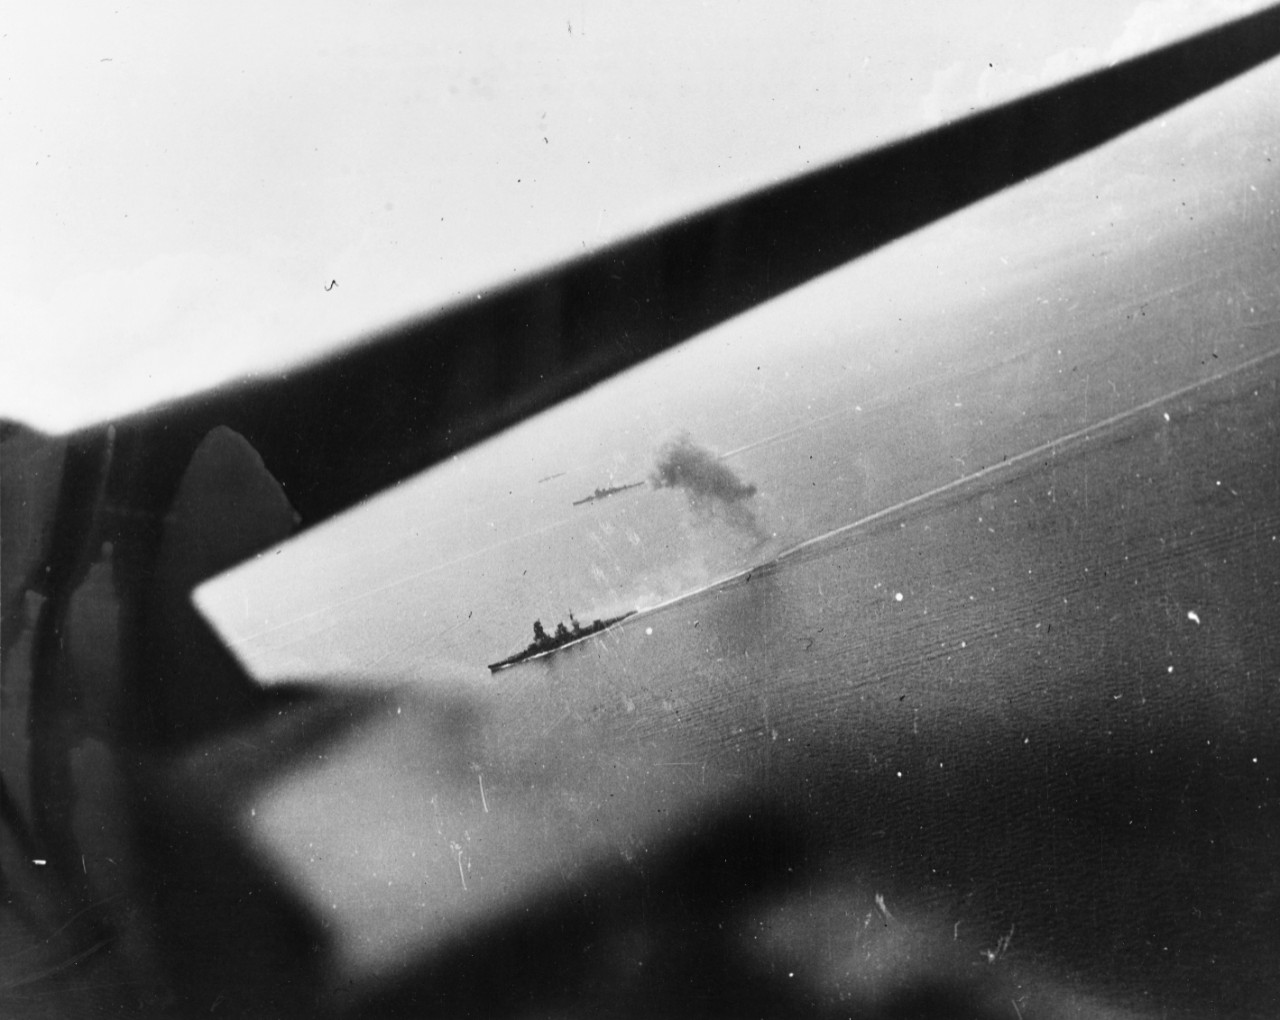 Japanese battleship Nagato and a Nachi-class cruiser under air attack during the Battle of the Sibuyan Sea, 24 October 1944. Photo by a plane from USS Intrepid (CV-11).